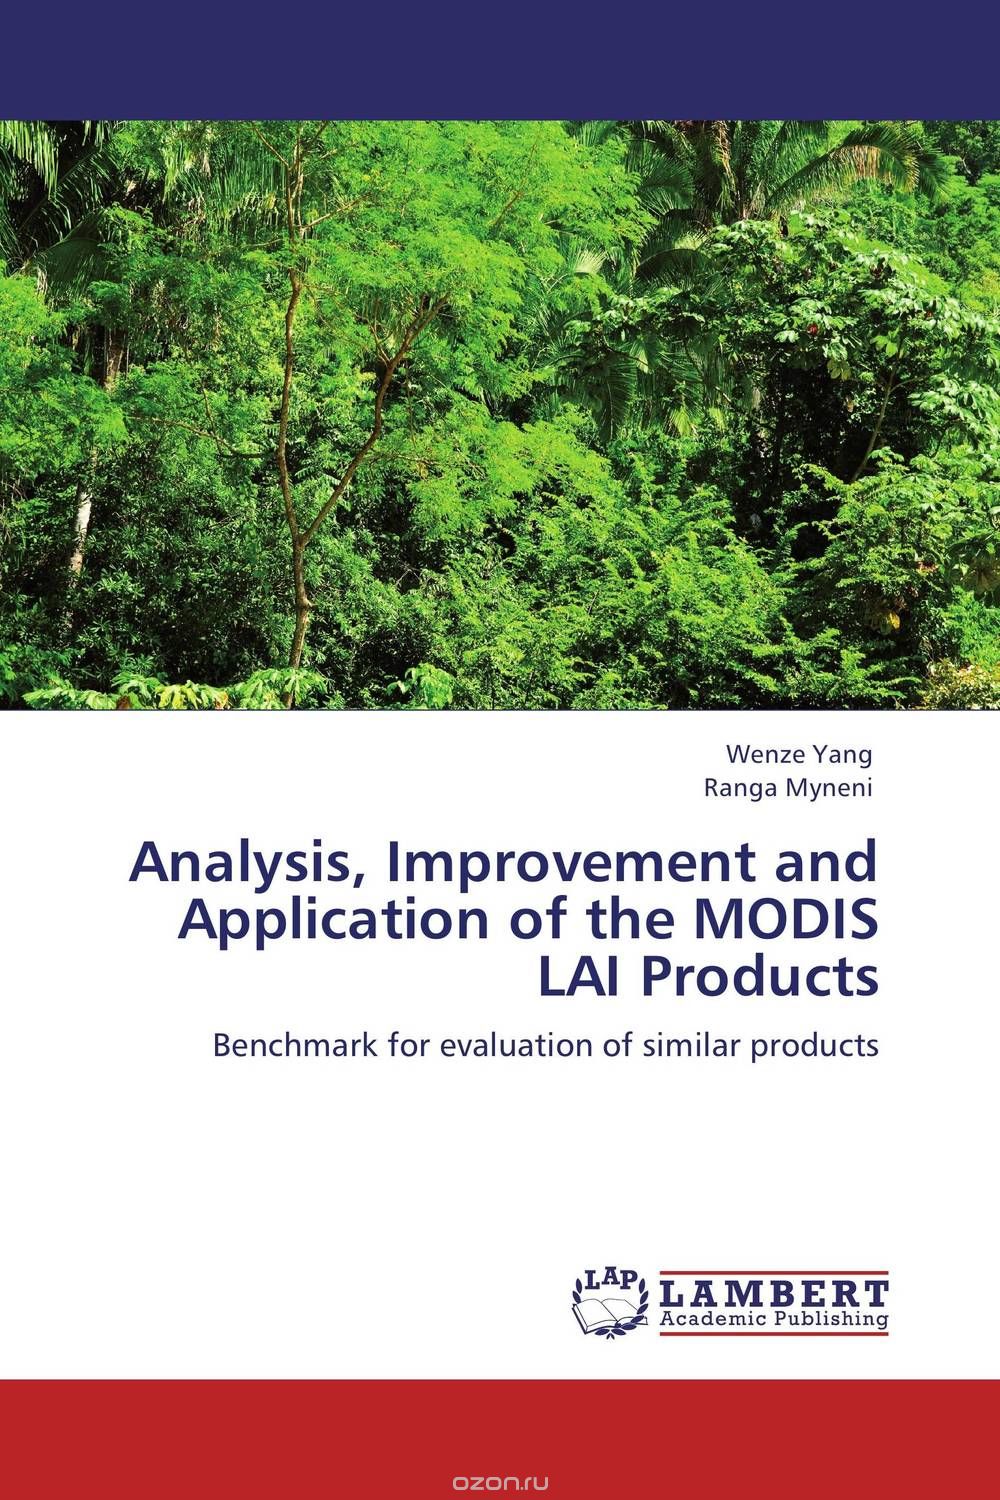 Analysis, Improvement and Application of the MODIS LAI Products